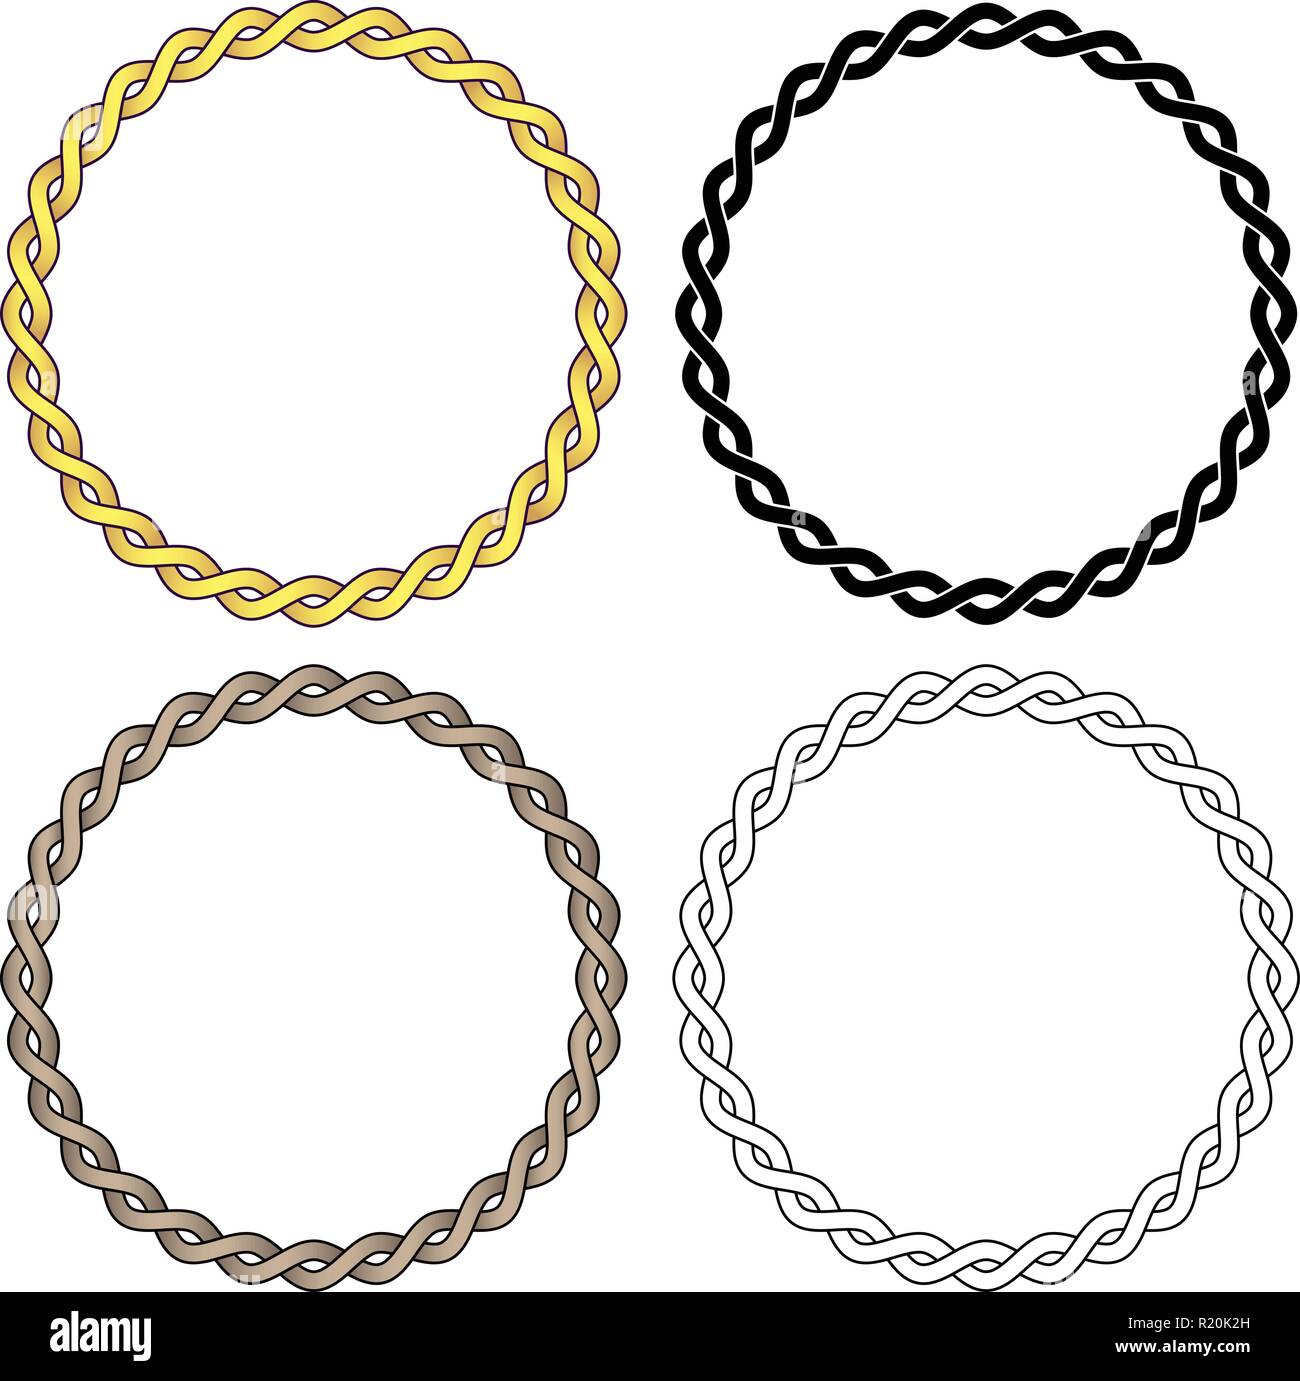 Twisted Braided Wire Rope Chain Vector Illustration Stock Vector